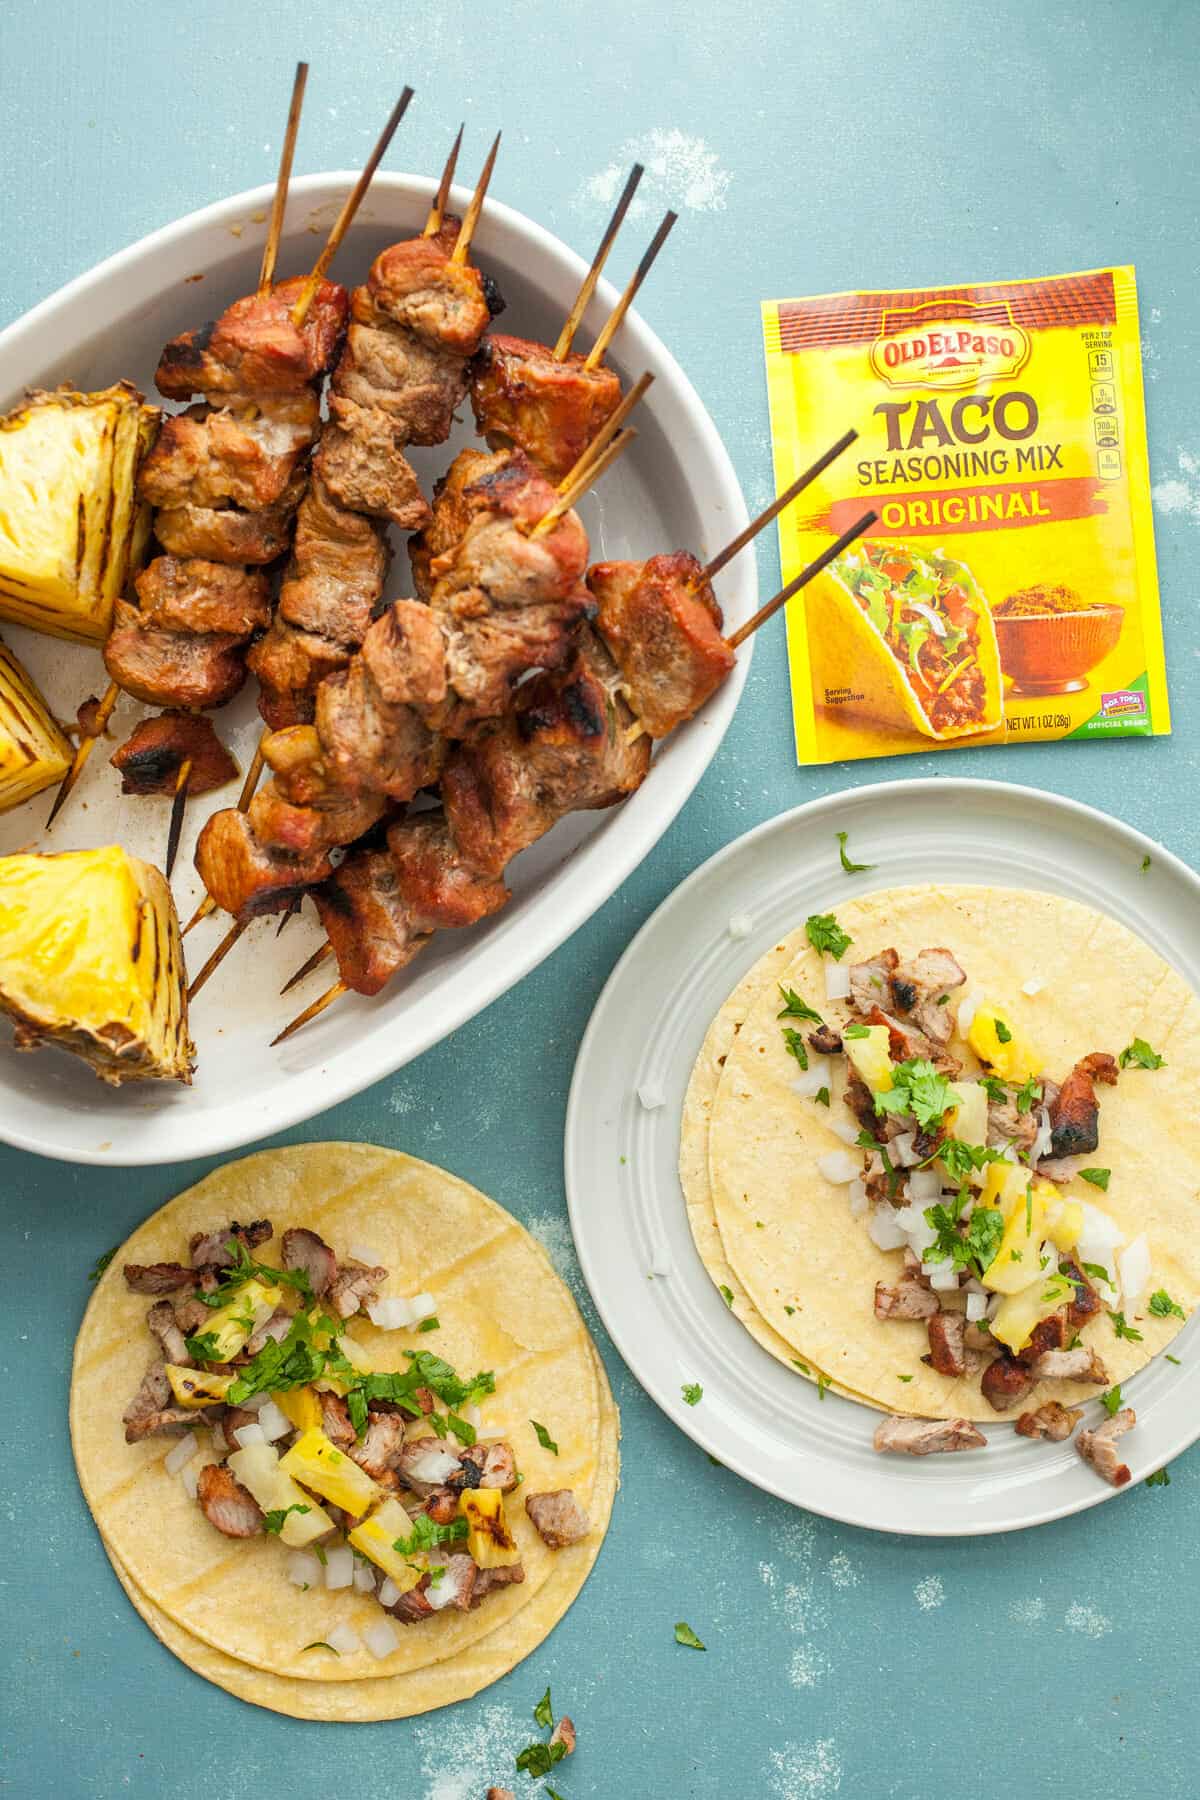 Tacos Al Pastor Kabobs: These marinated pork tacos have all classic flavors of Tacos Al Pastor without so much work. If you're a taco lover, this is a must try! | macheesmo.com